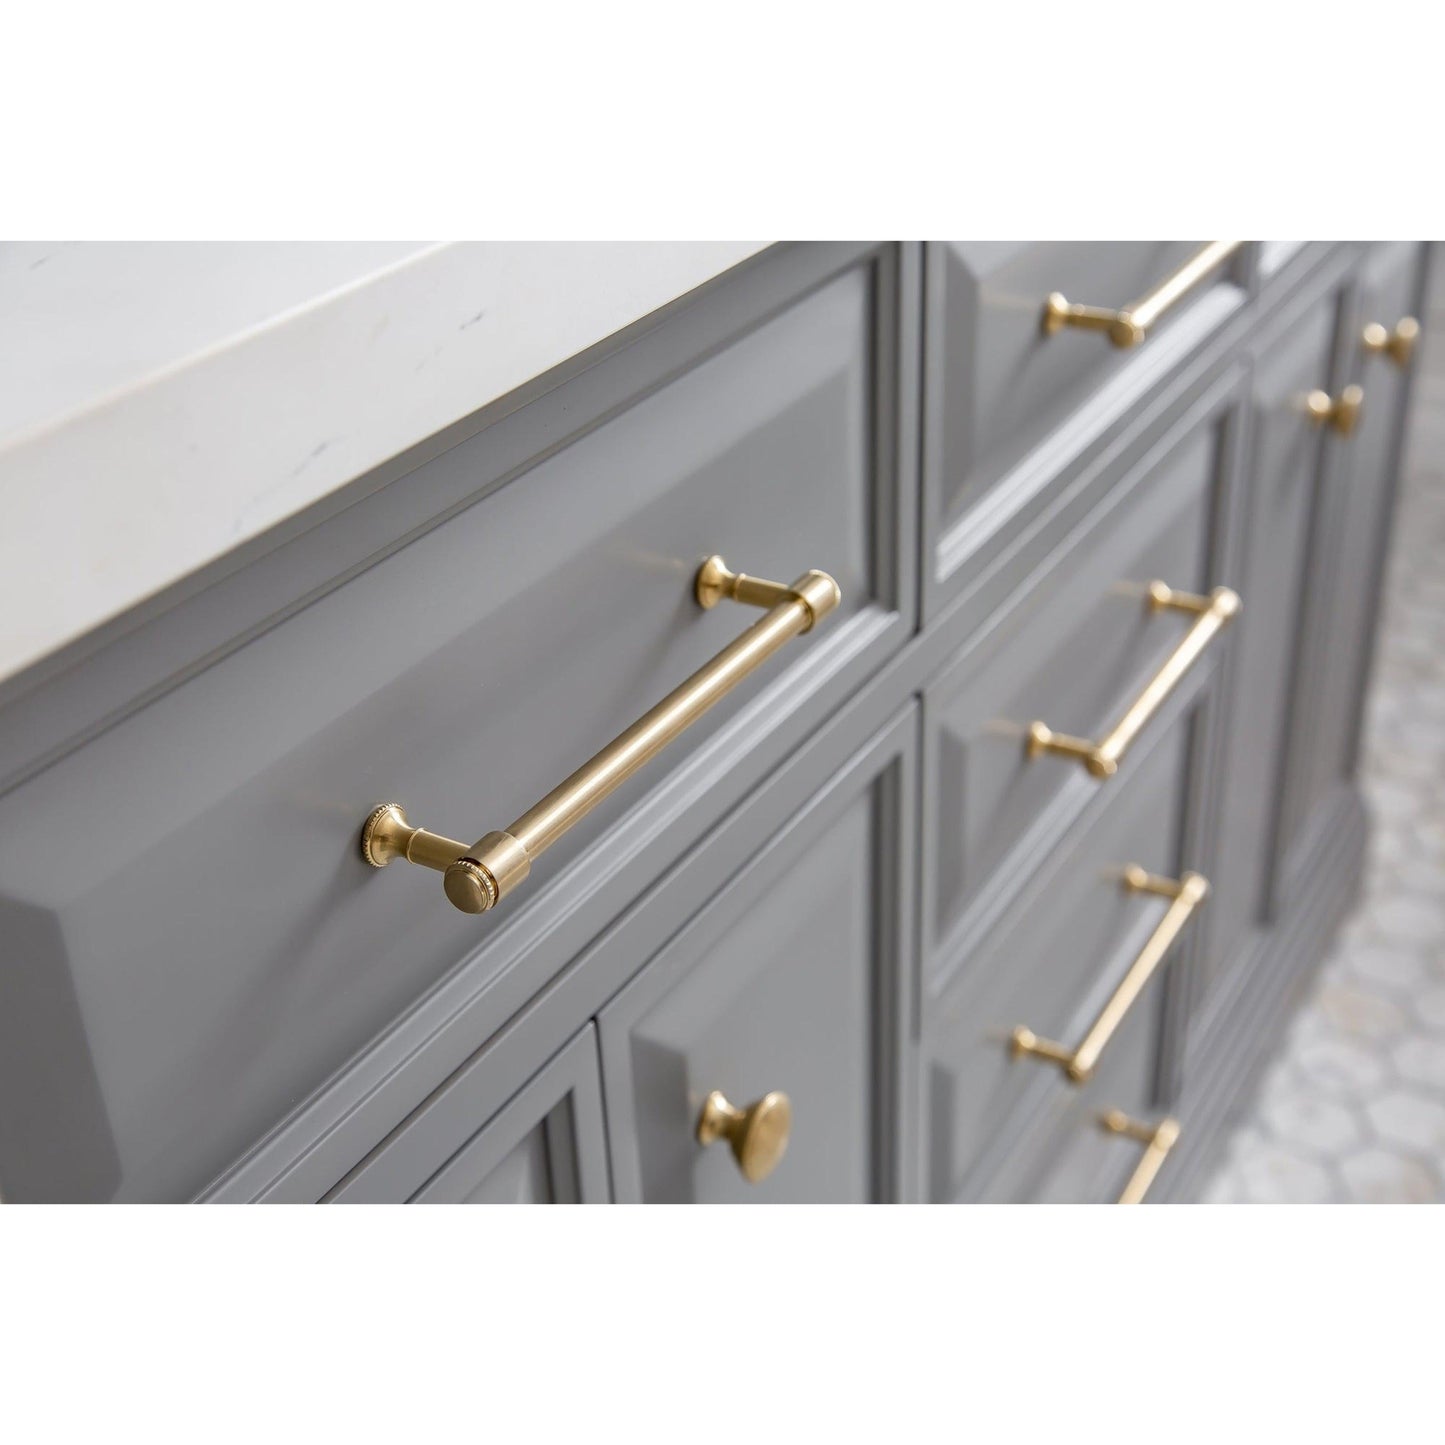 Water Creation Palace 60" Quartz Carrara Cashmere Grey Bathroom Vanity Set With Hardware And F2-0013 Faucets in Satin Gold Finish And Only Mirrors in Chrome Finish